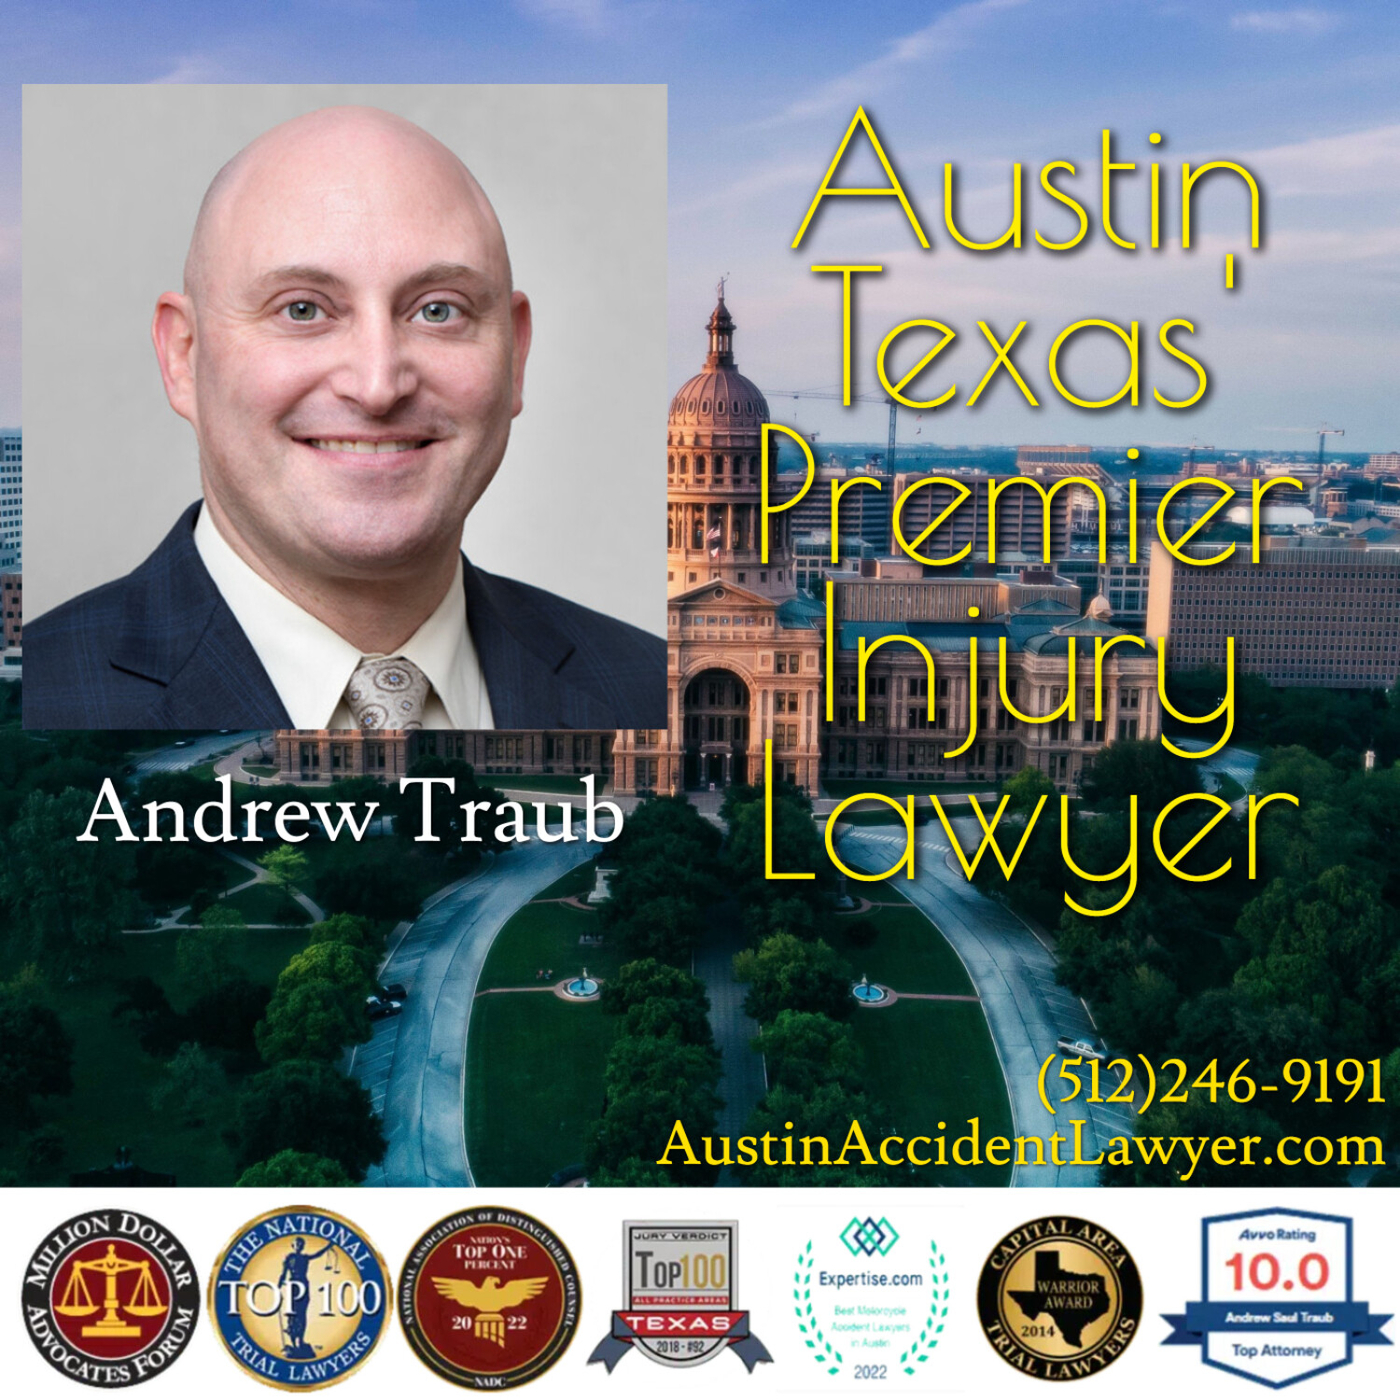 Top 10 Best Austin Personal Injury Lawyers